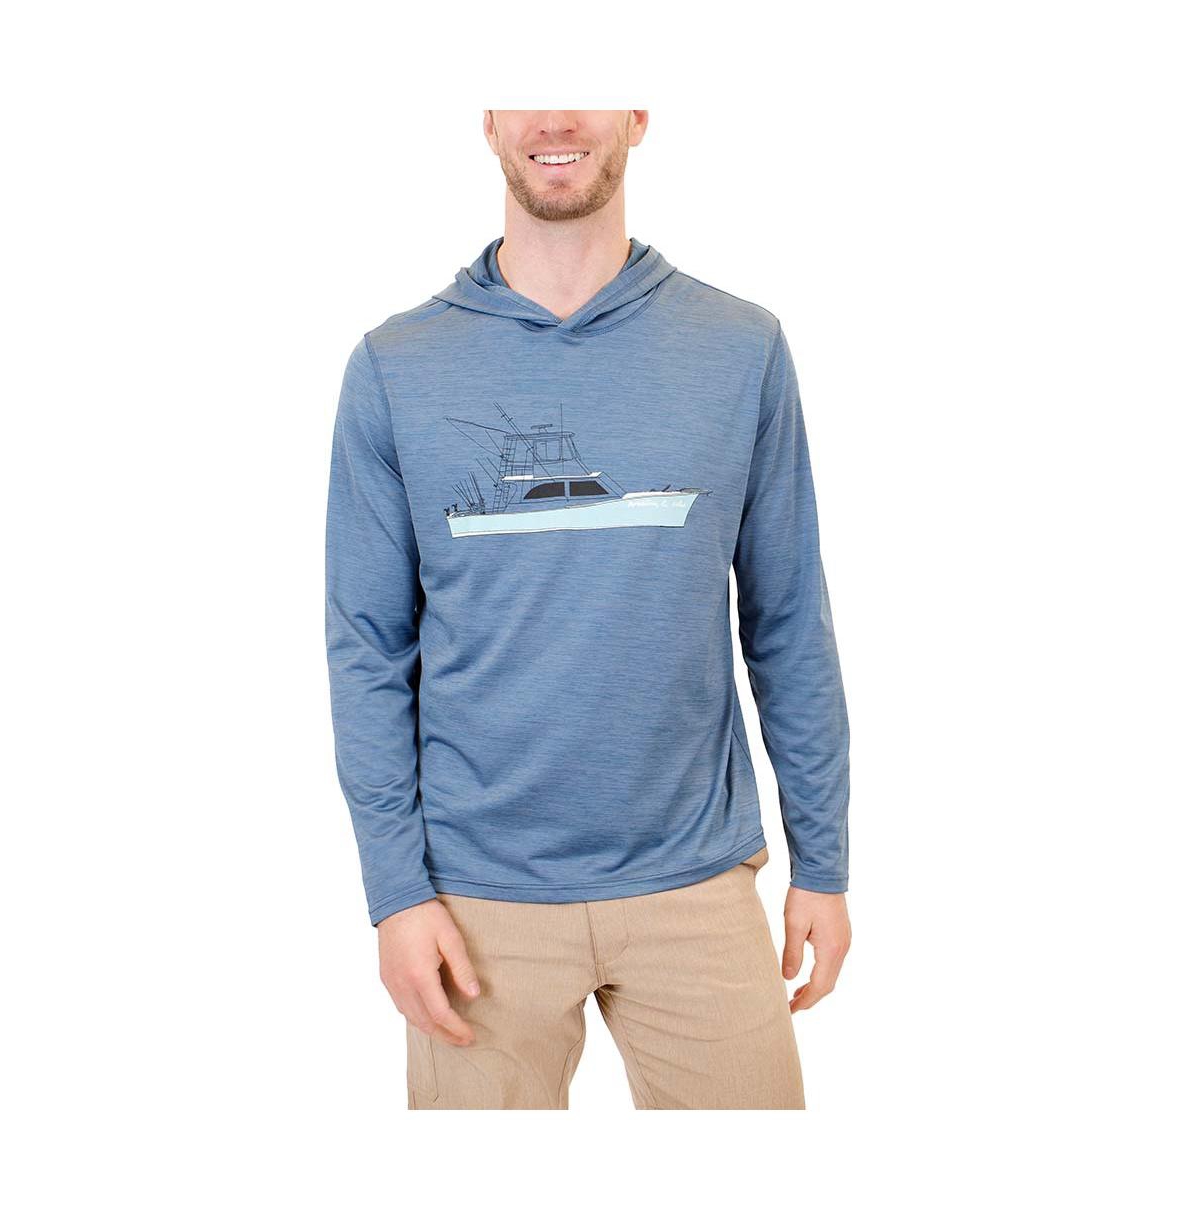 Men's Sun Protection Fishing Boat Graphic Hoodie - Slate space dye